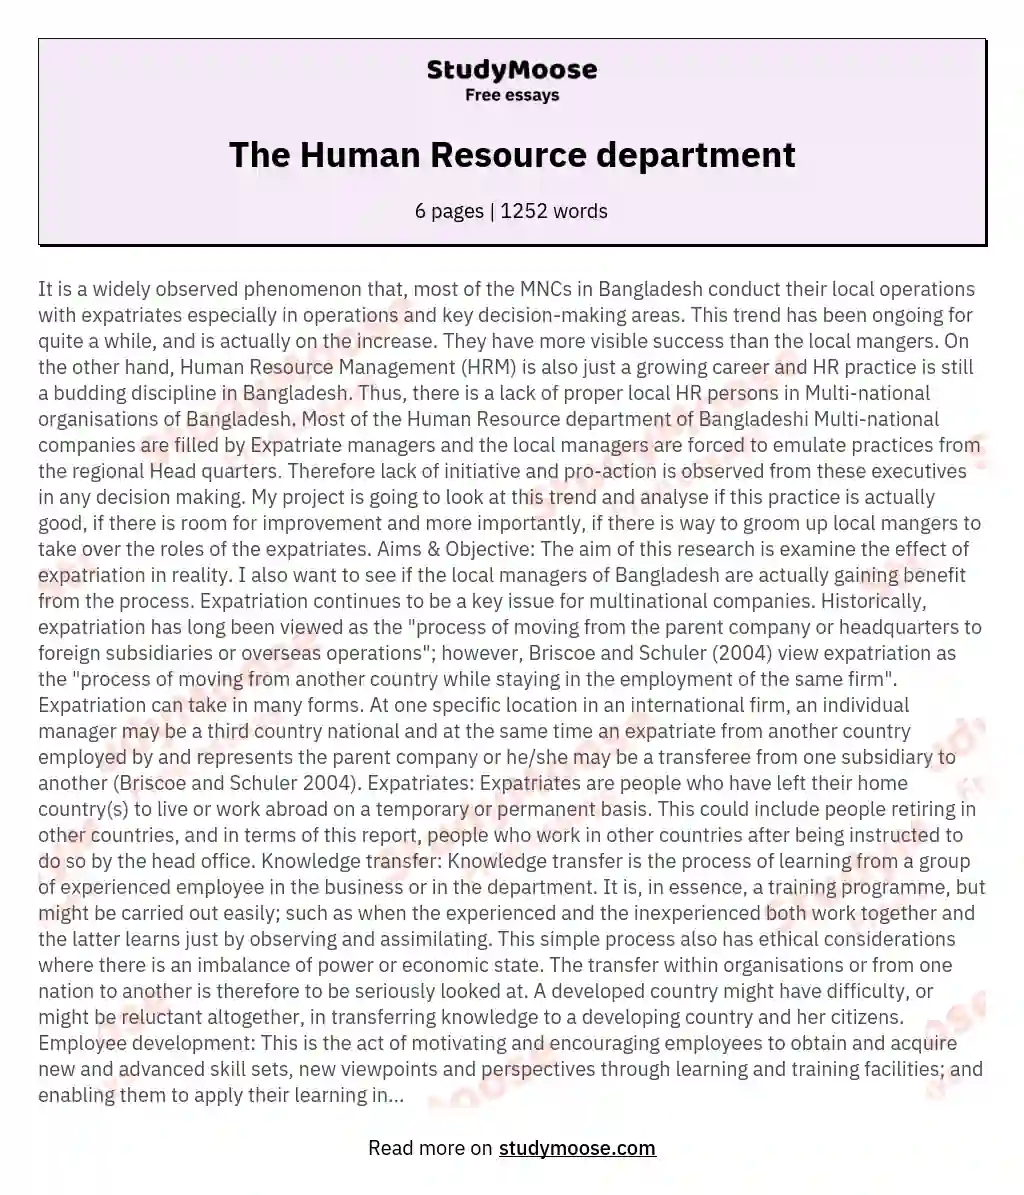 The Human Resource department essay